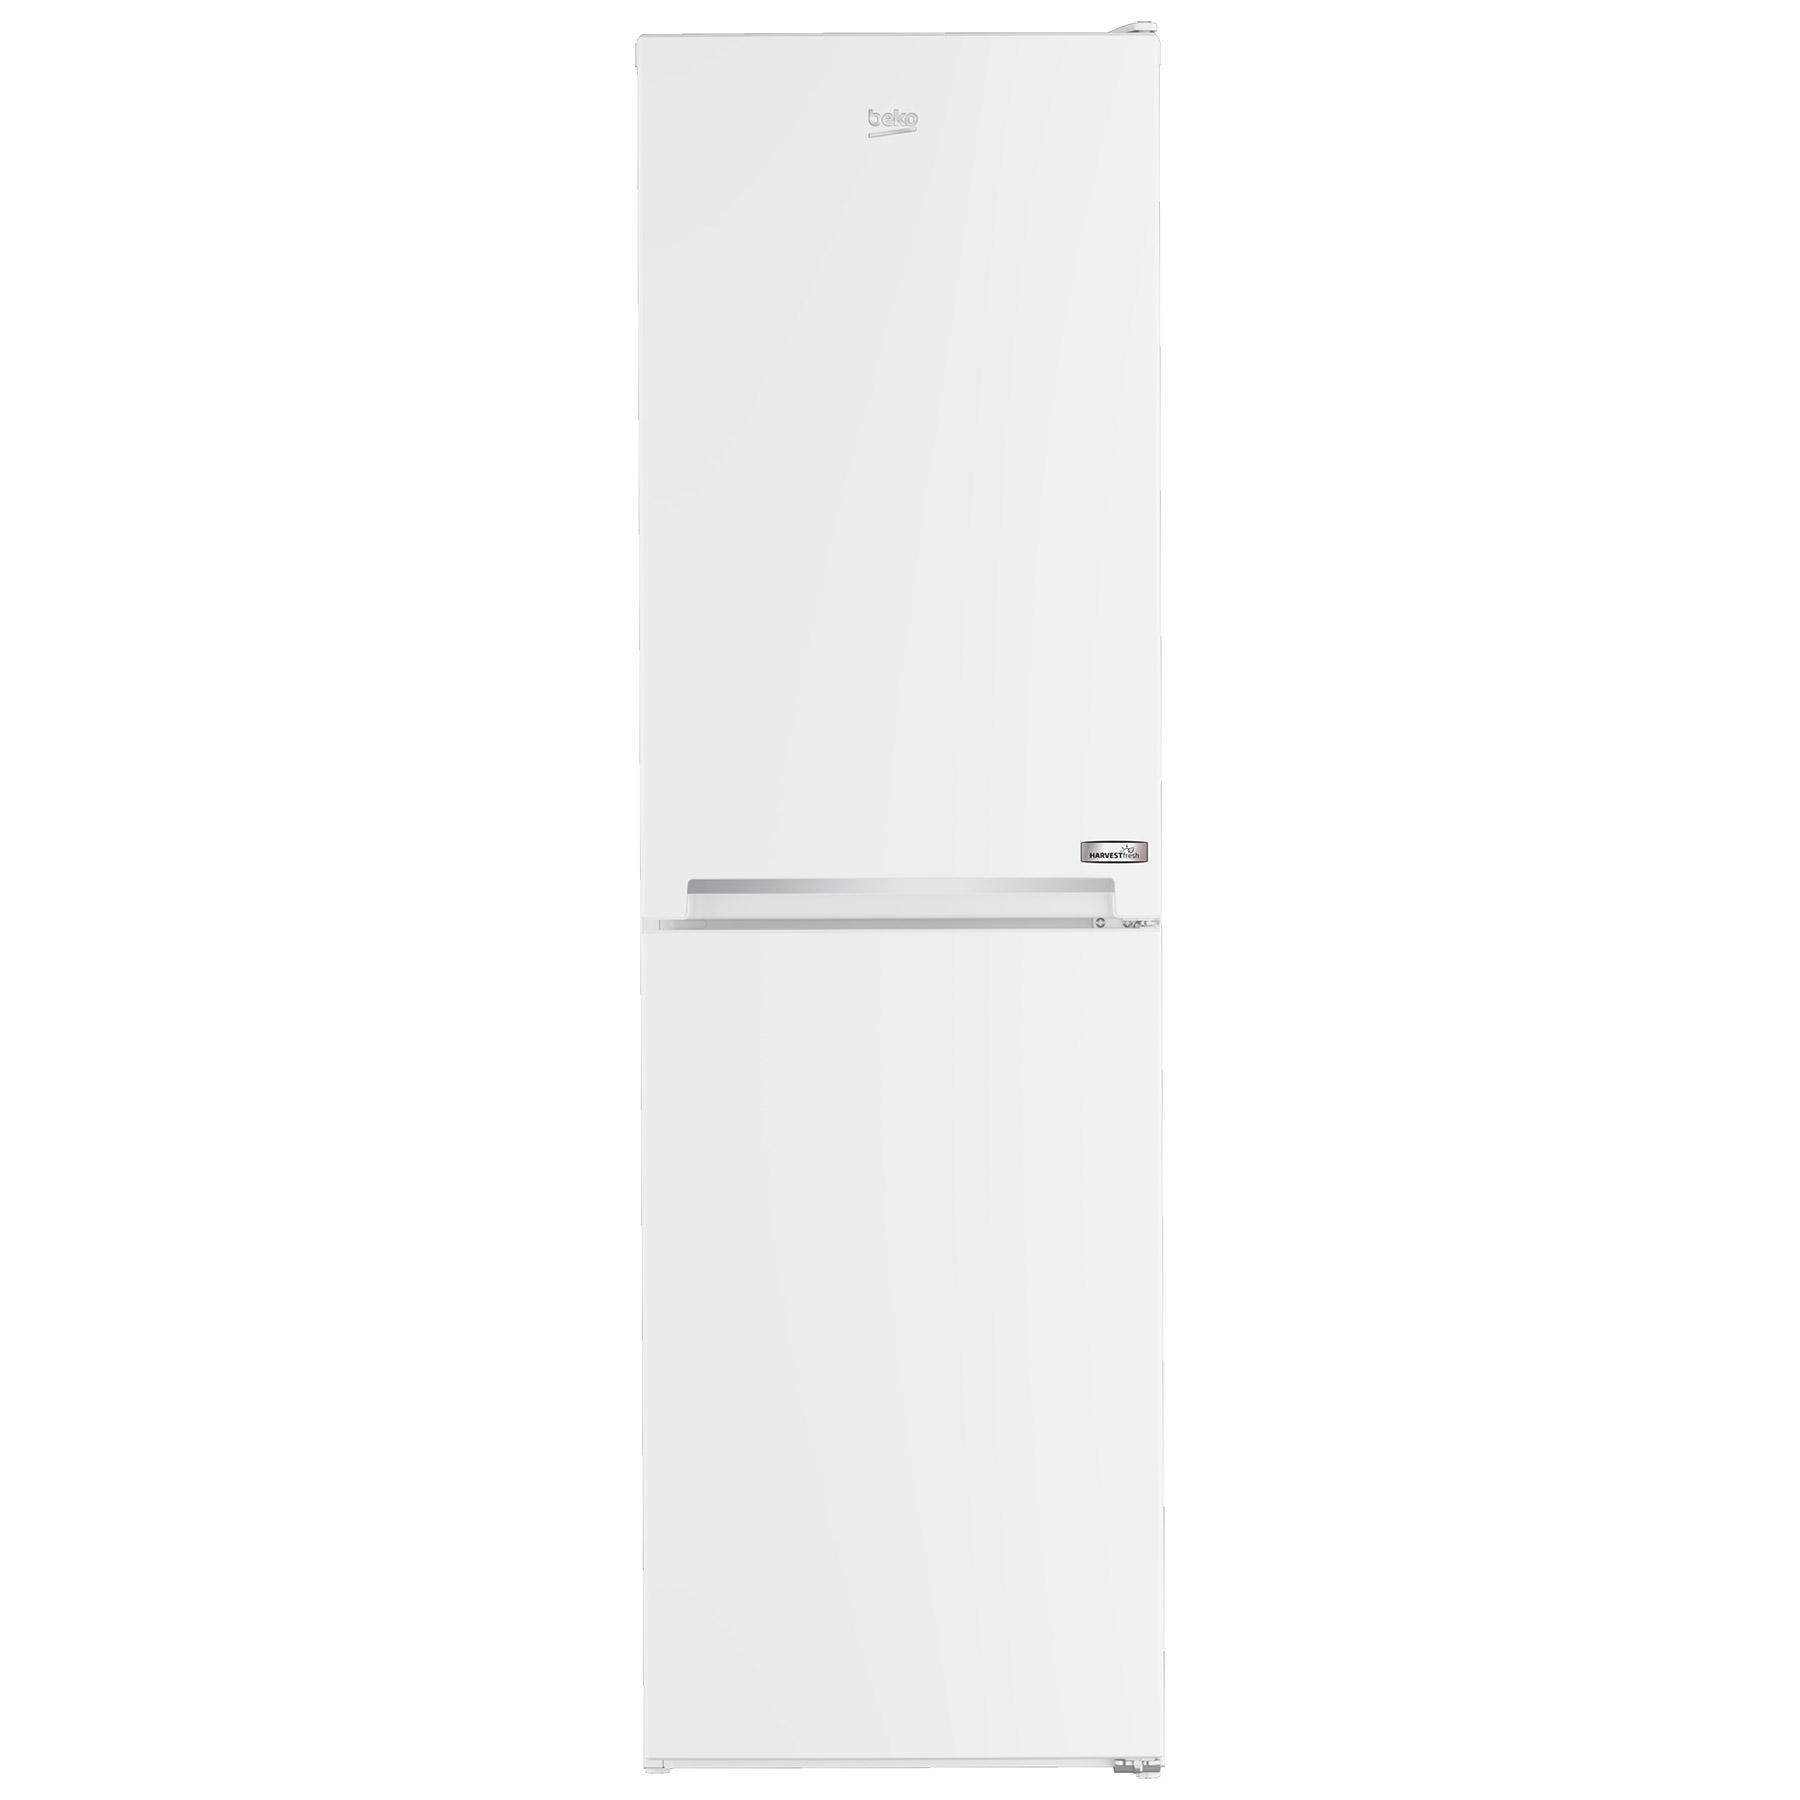 Image of Beko CNG3582VW 55cm Frost Free Fridge Freezer in White 1 82m F Rated